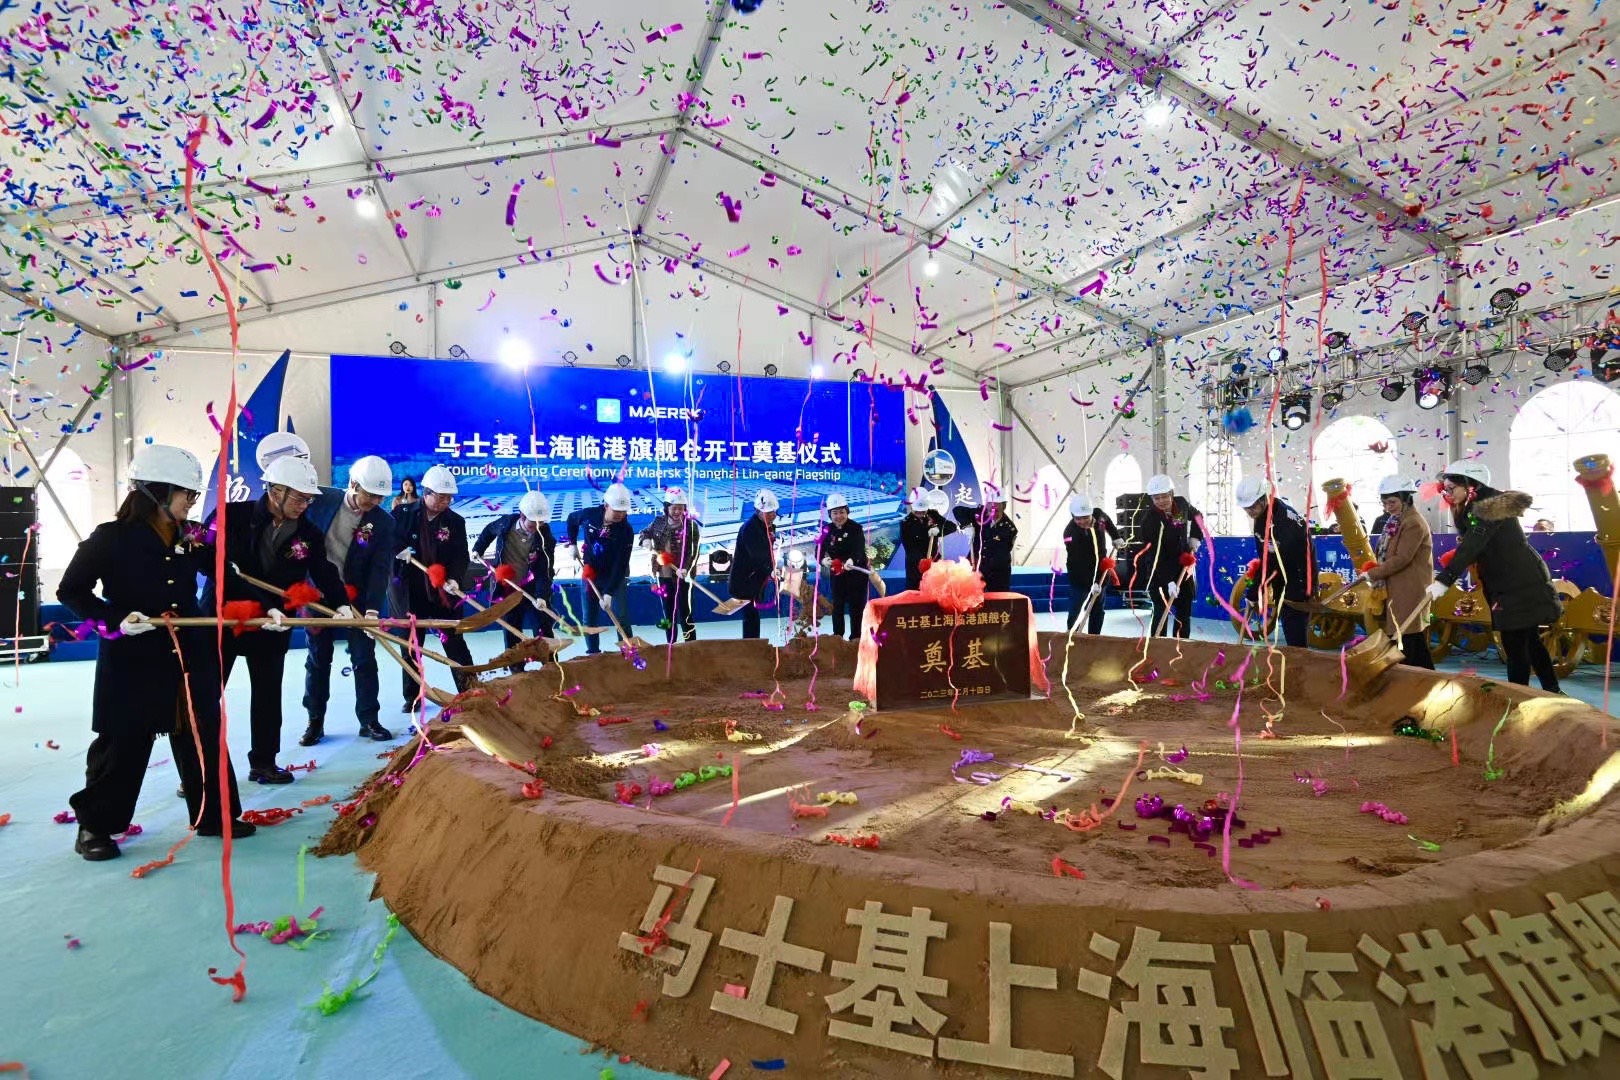 A groundbreaking ceremony of Maersk's one-billion-yuan ($150 million) integrated logistics flagship warehouse project takes place in Shanghai on February 14, 2023 Photo: Courtesy of Maersk